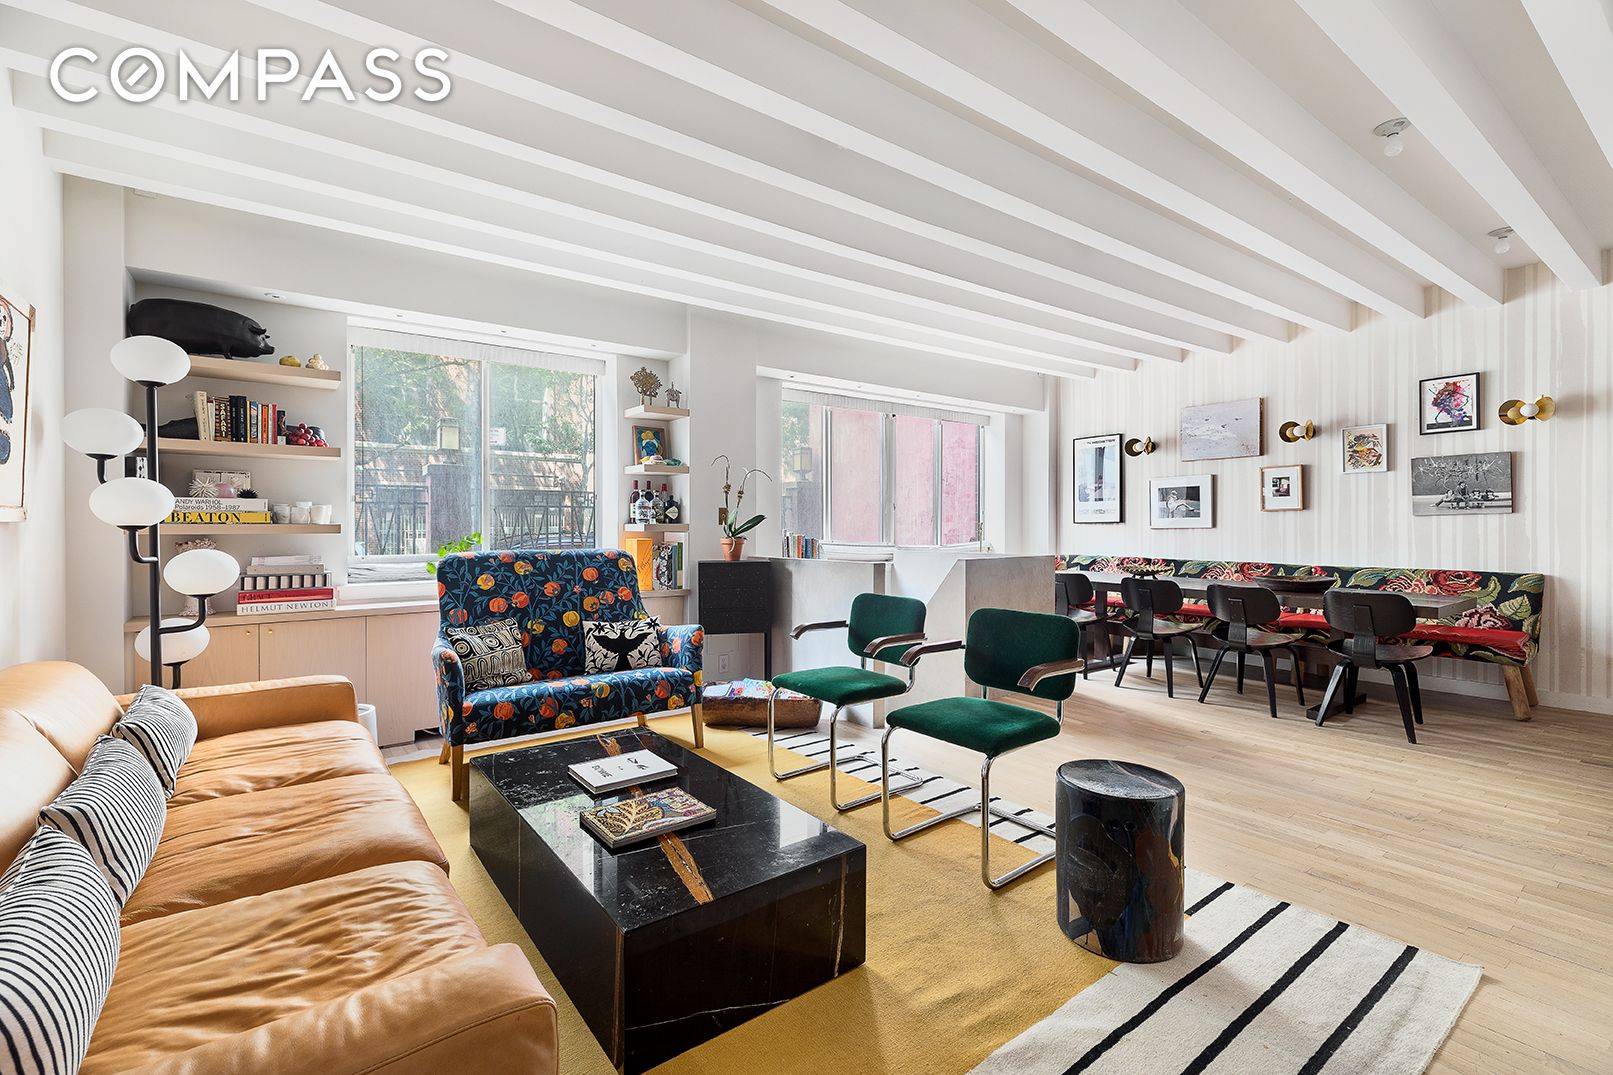 AS FEATURED ON THE COVER OF ELLE DE COR Beautifully renovated West Village duplex condo with large private patio garden perfect for entertaining.